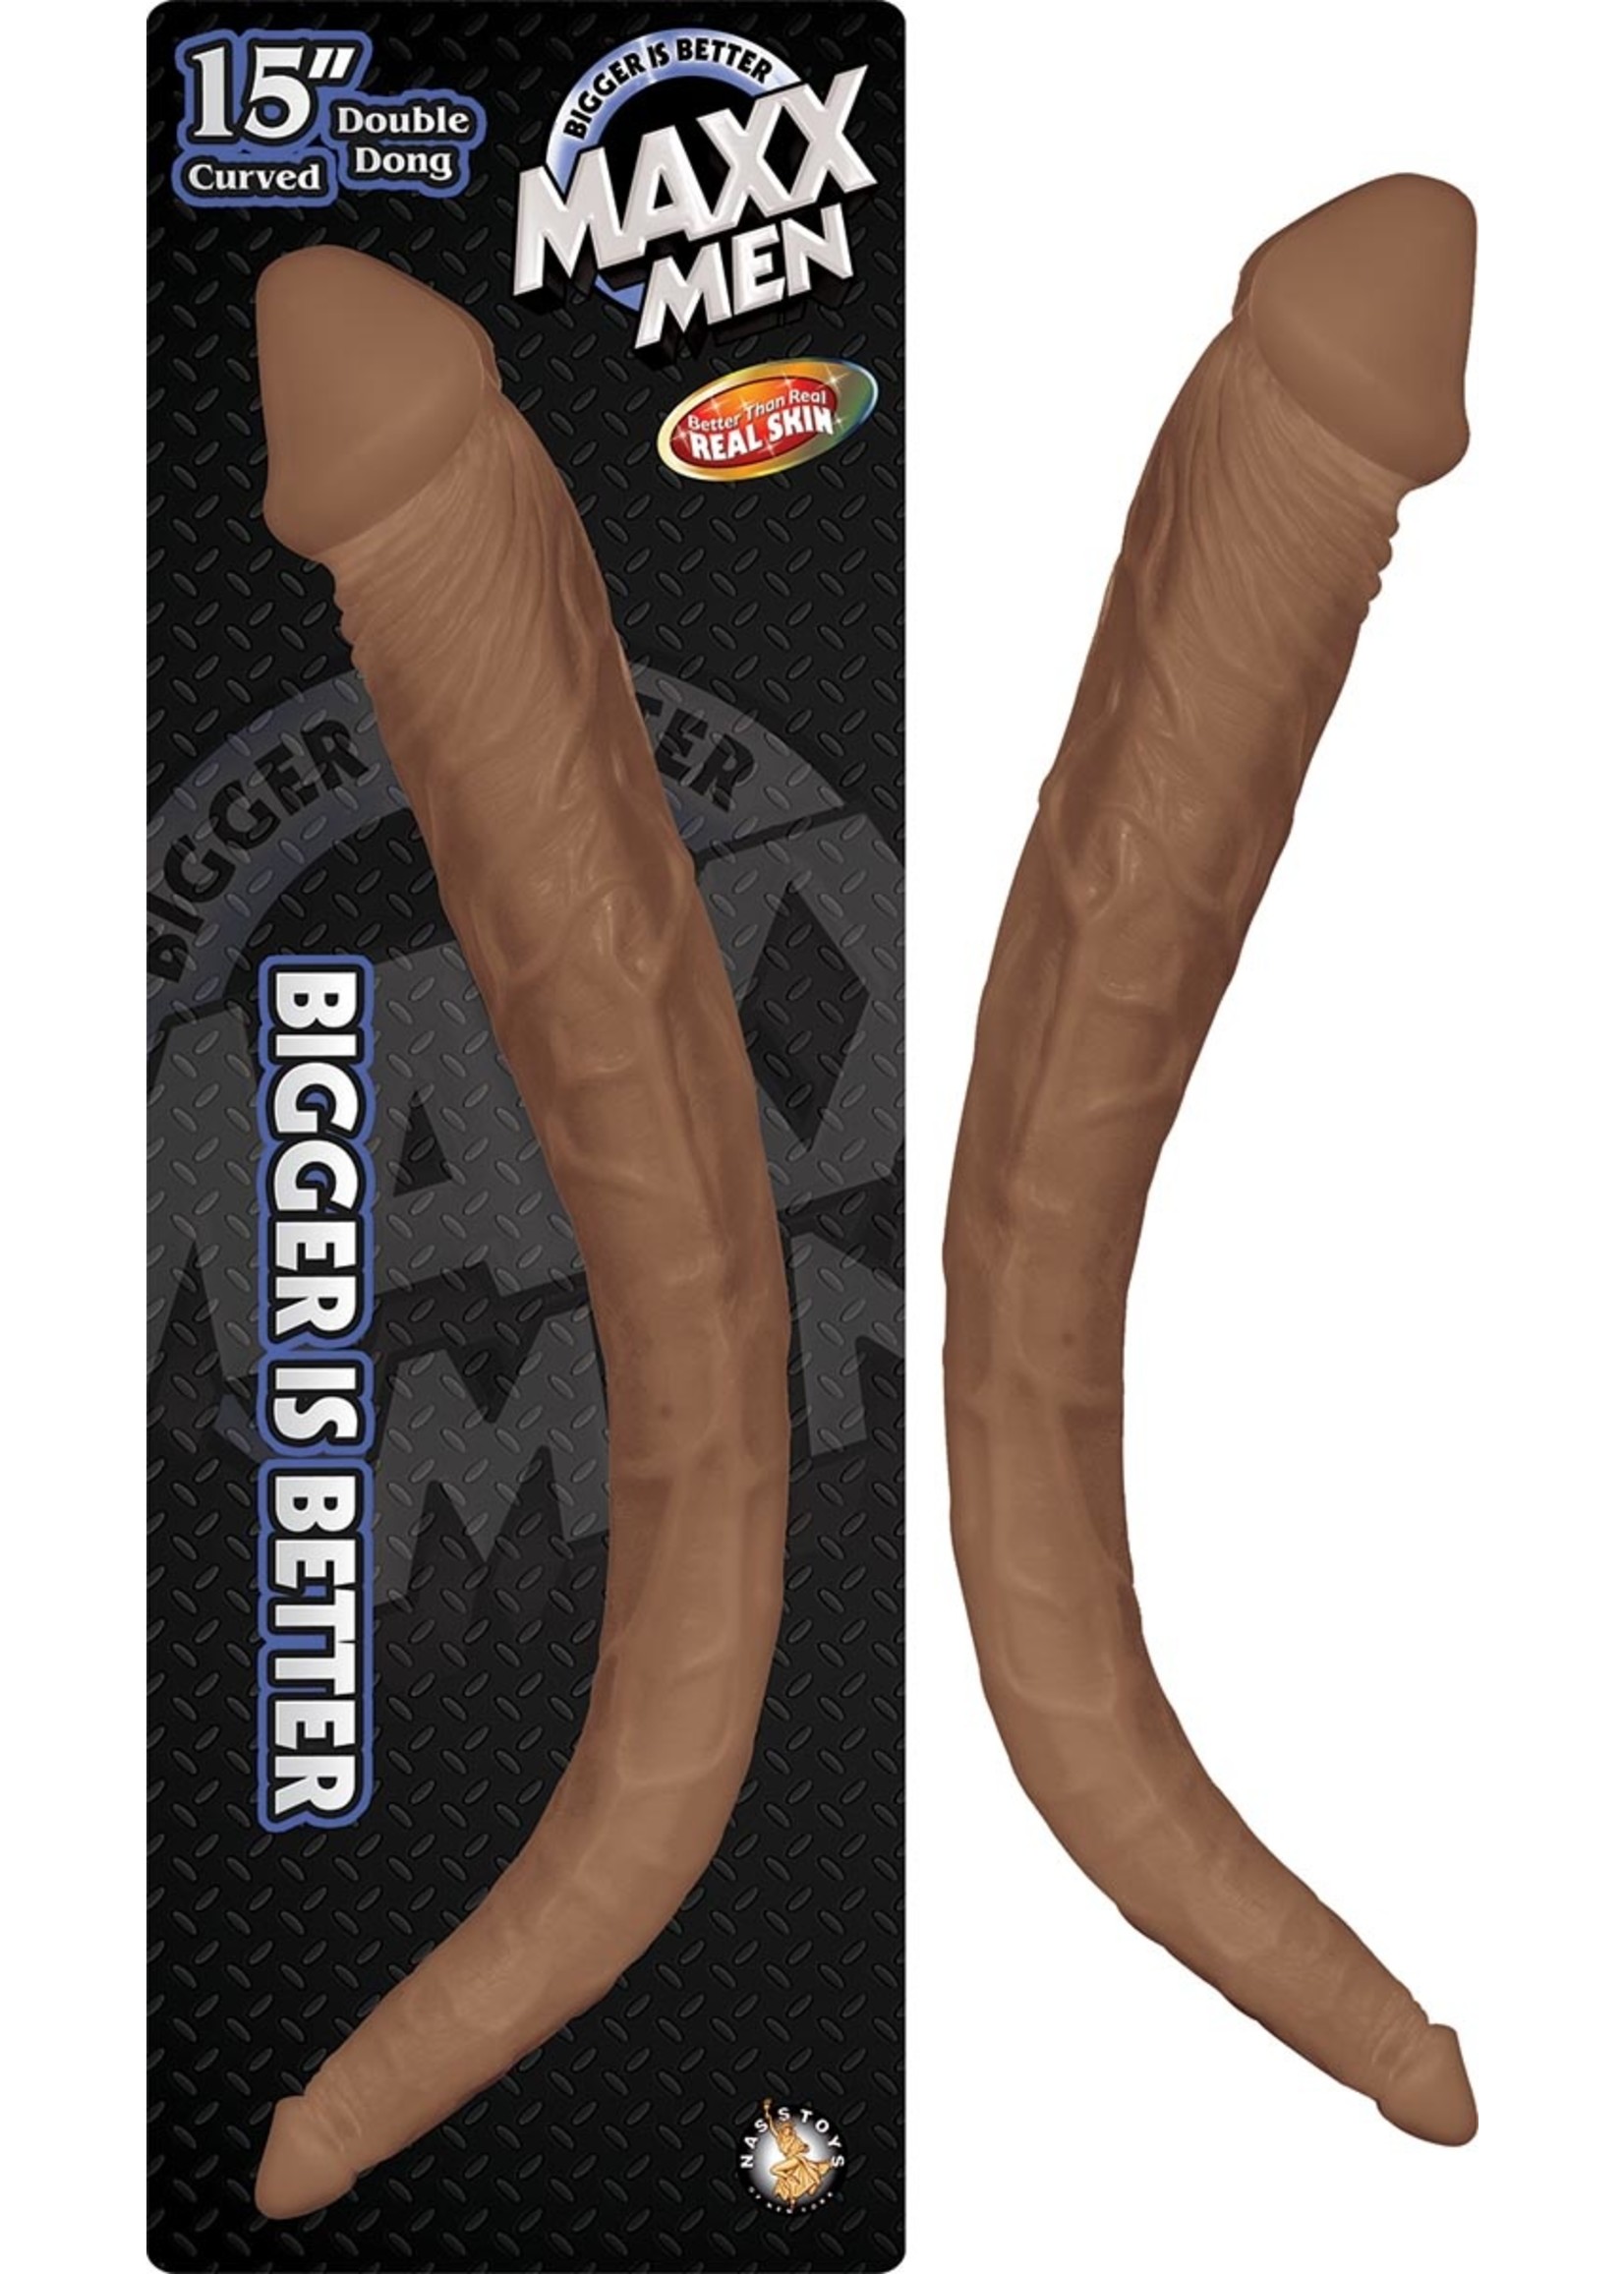 Nasstoys Maxx Men Realistic Curved Double Dong Waterproof Brown 15 Inch